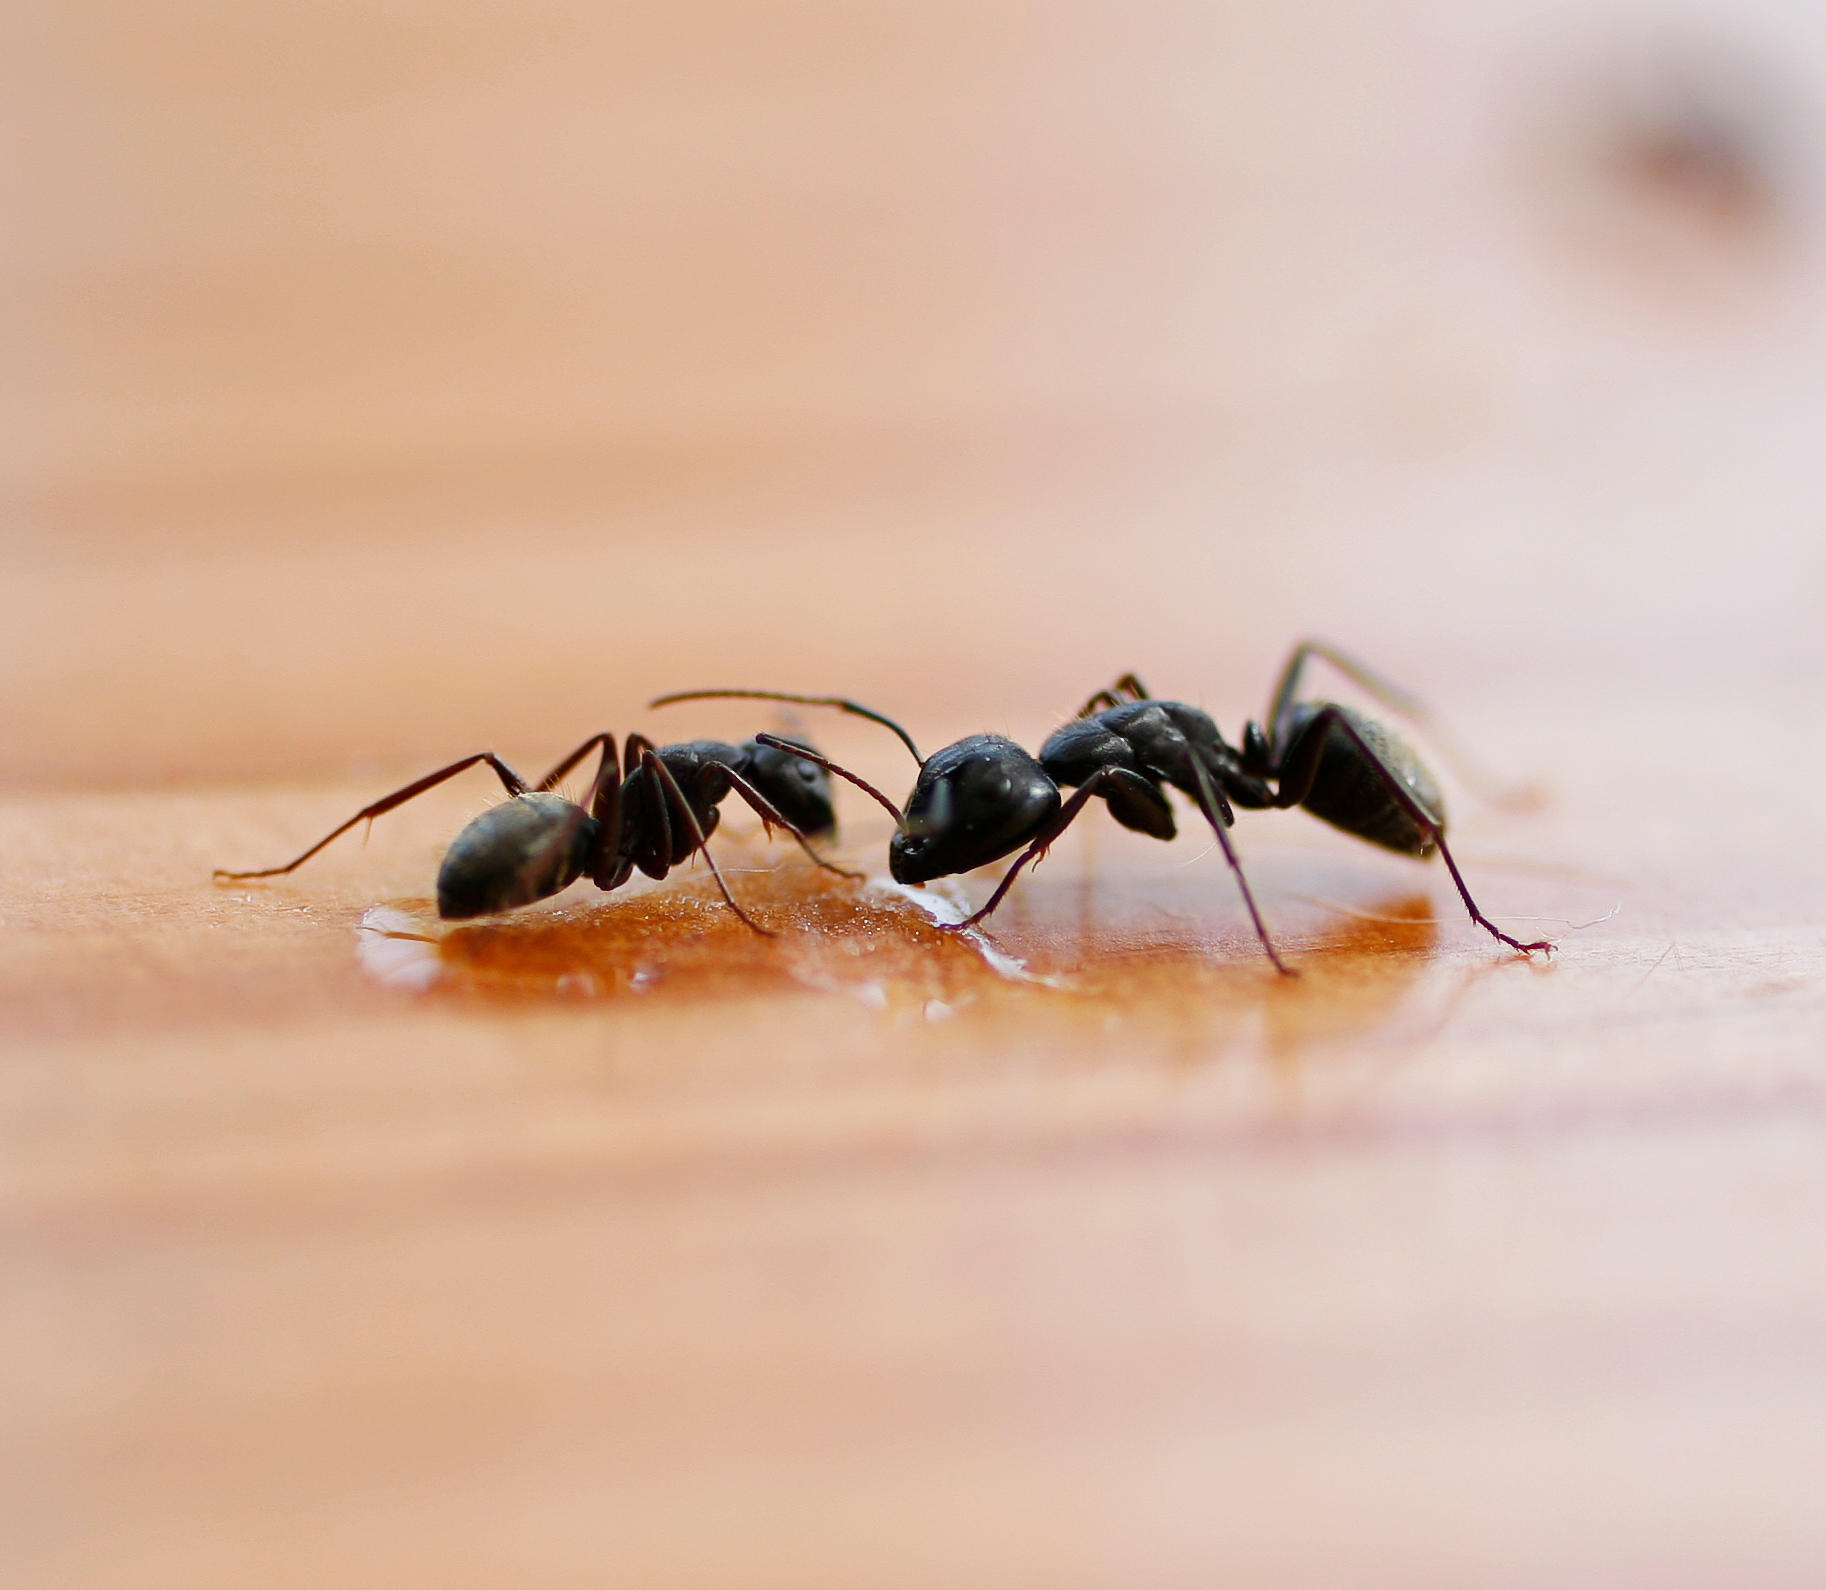 Top rated ant control services in Virginia Beach and surrounding cities. Trust Universal Pest for ant control.